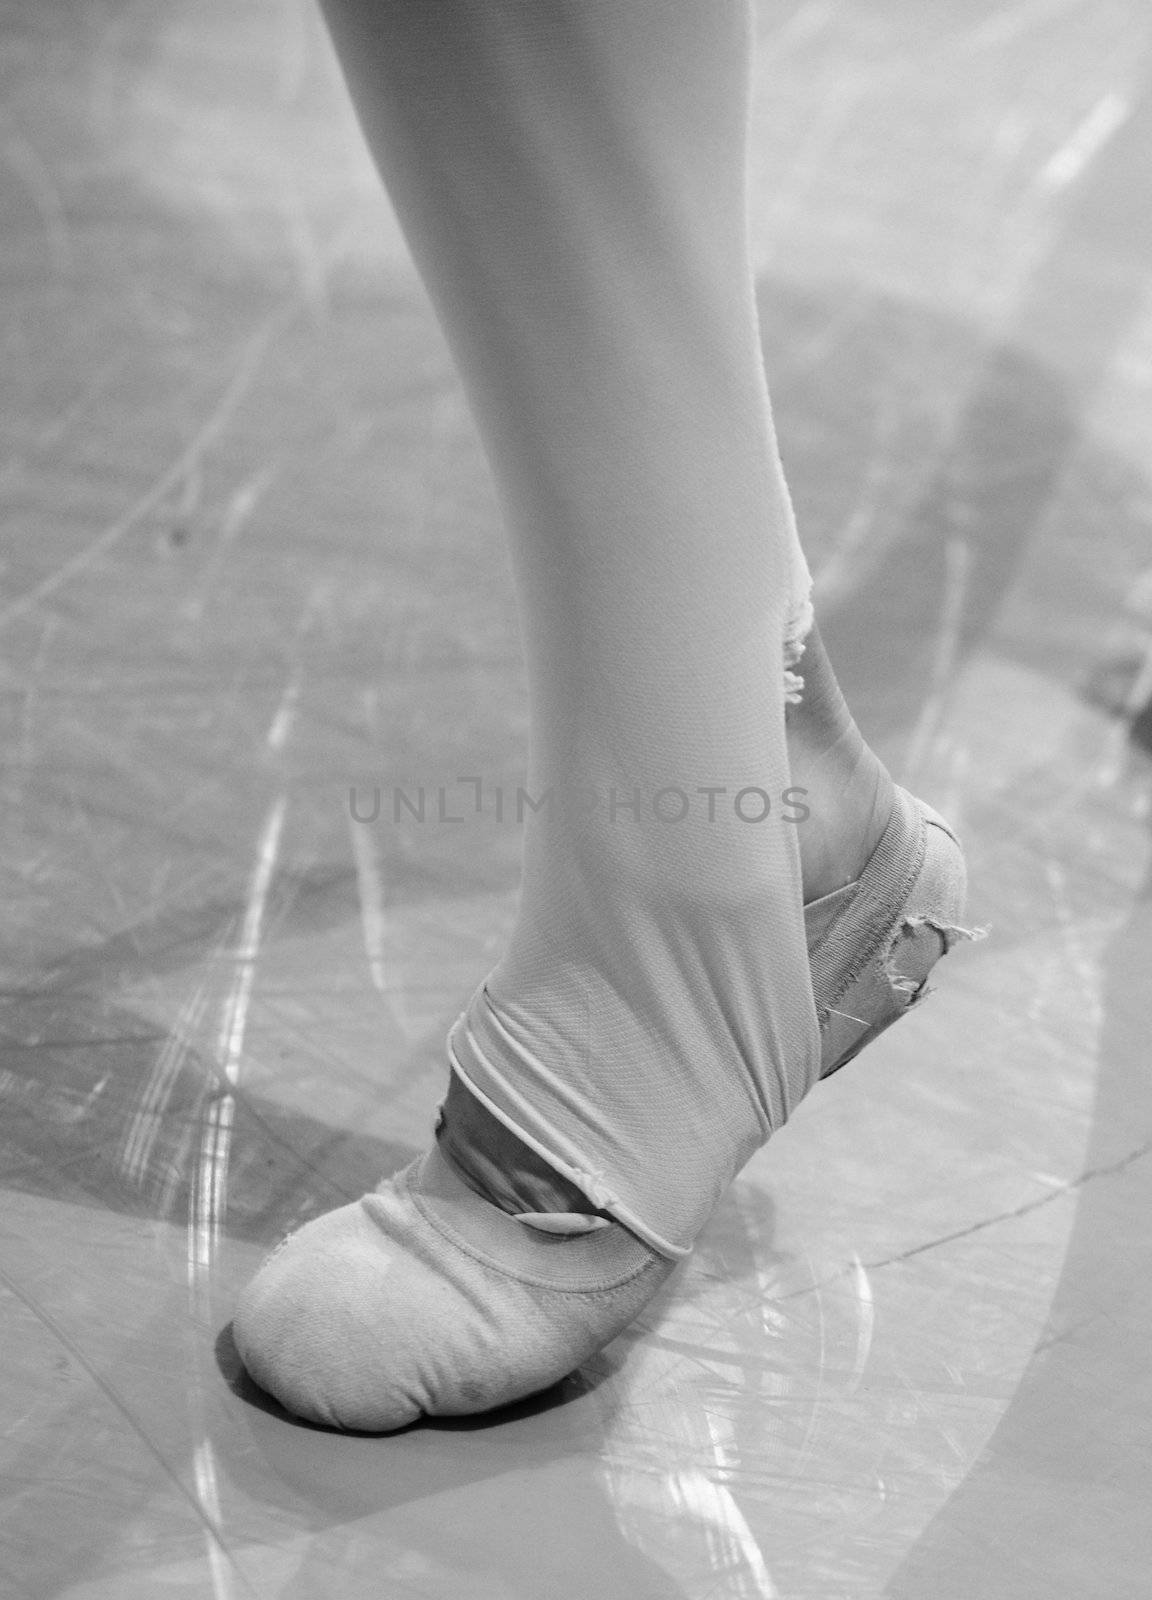 worn out shoes on a ballet dancer to show sore dancer's feet